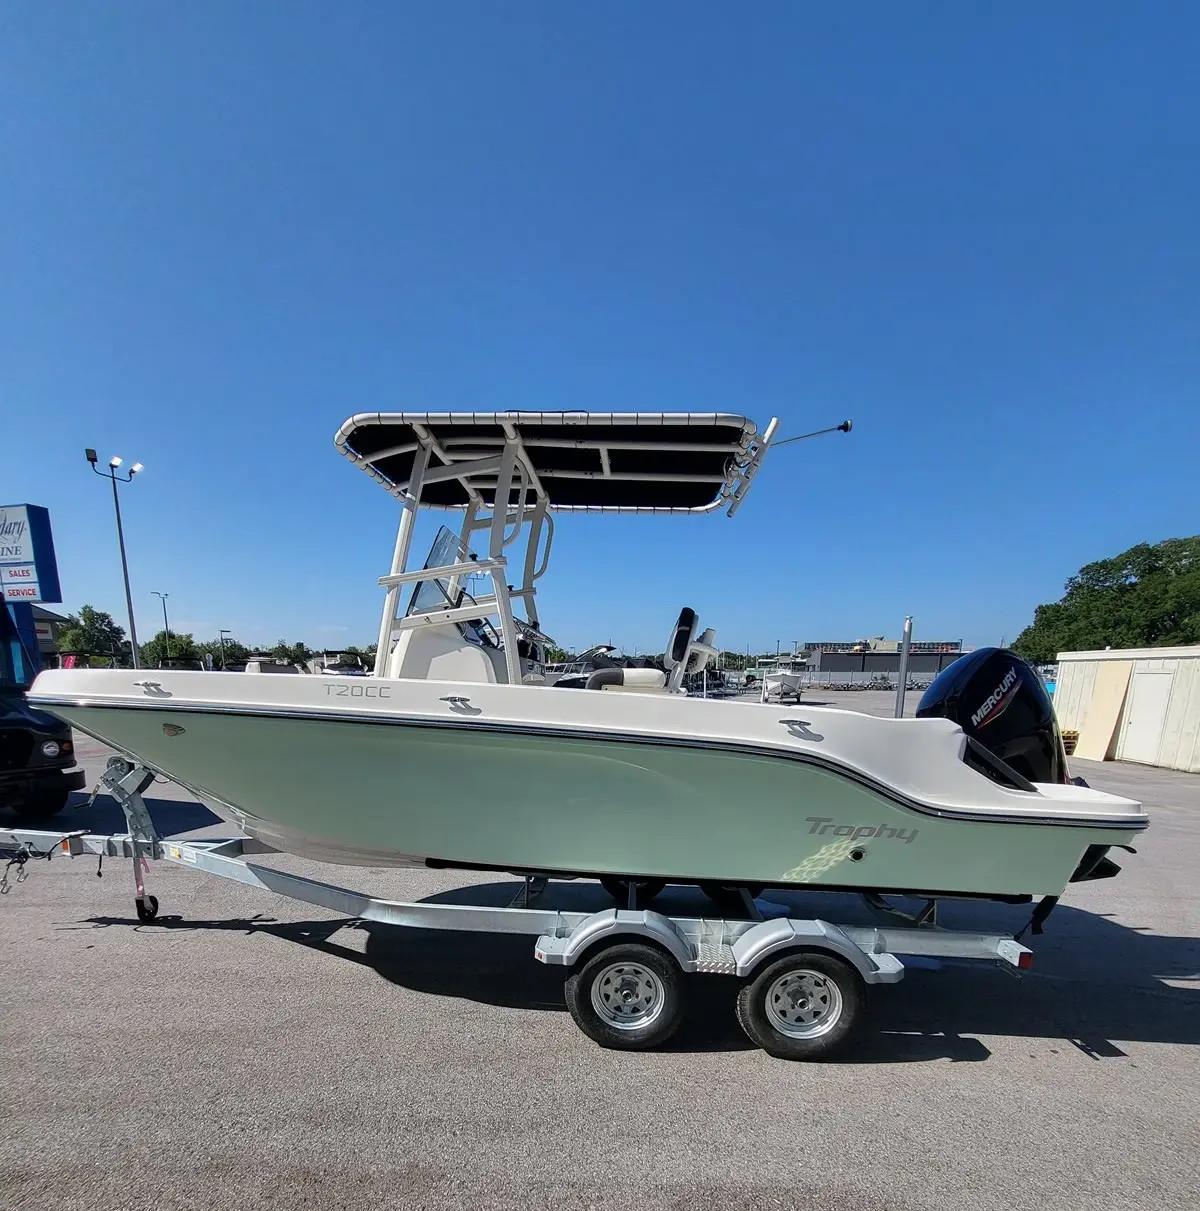 2023 Bayliner T20CC Center Console for sale - YachtWorld